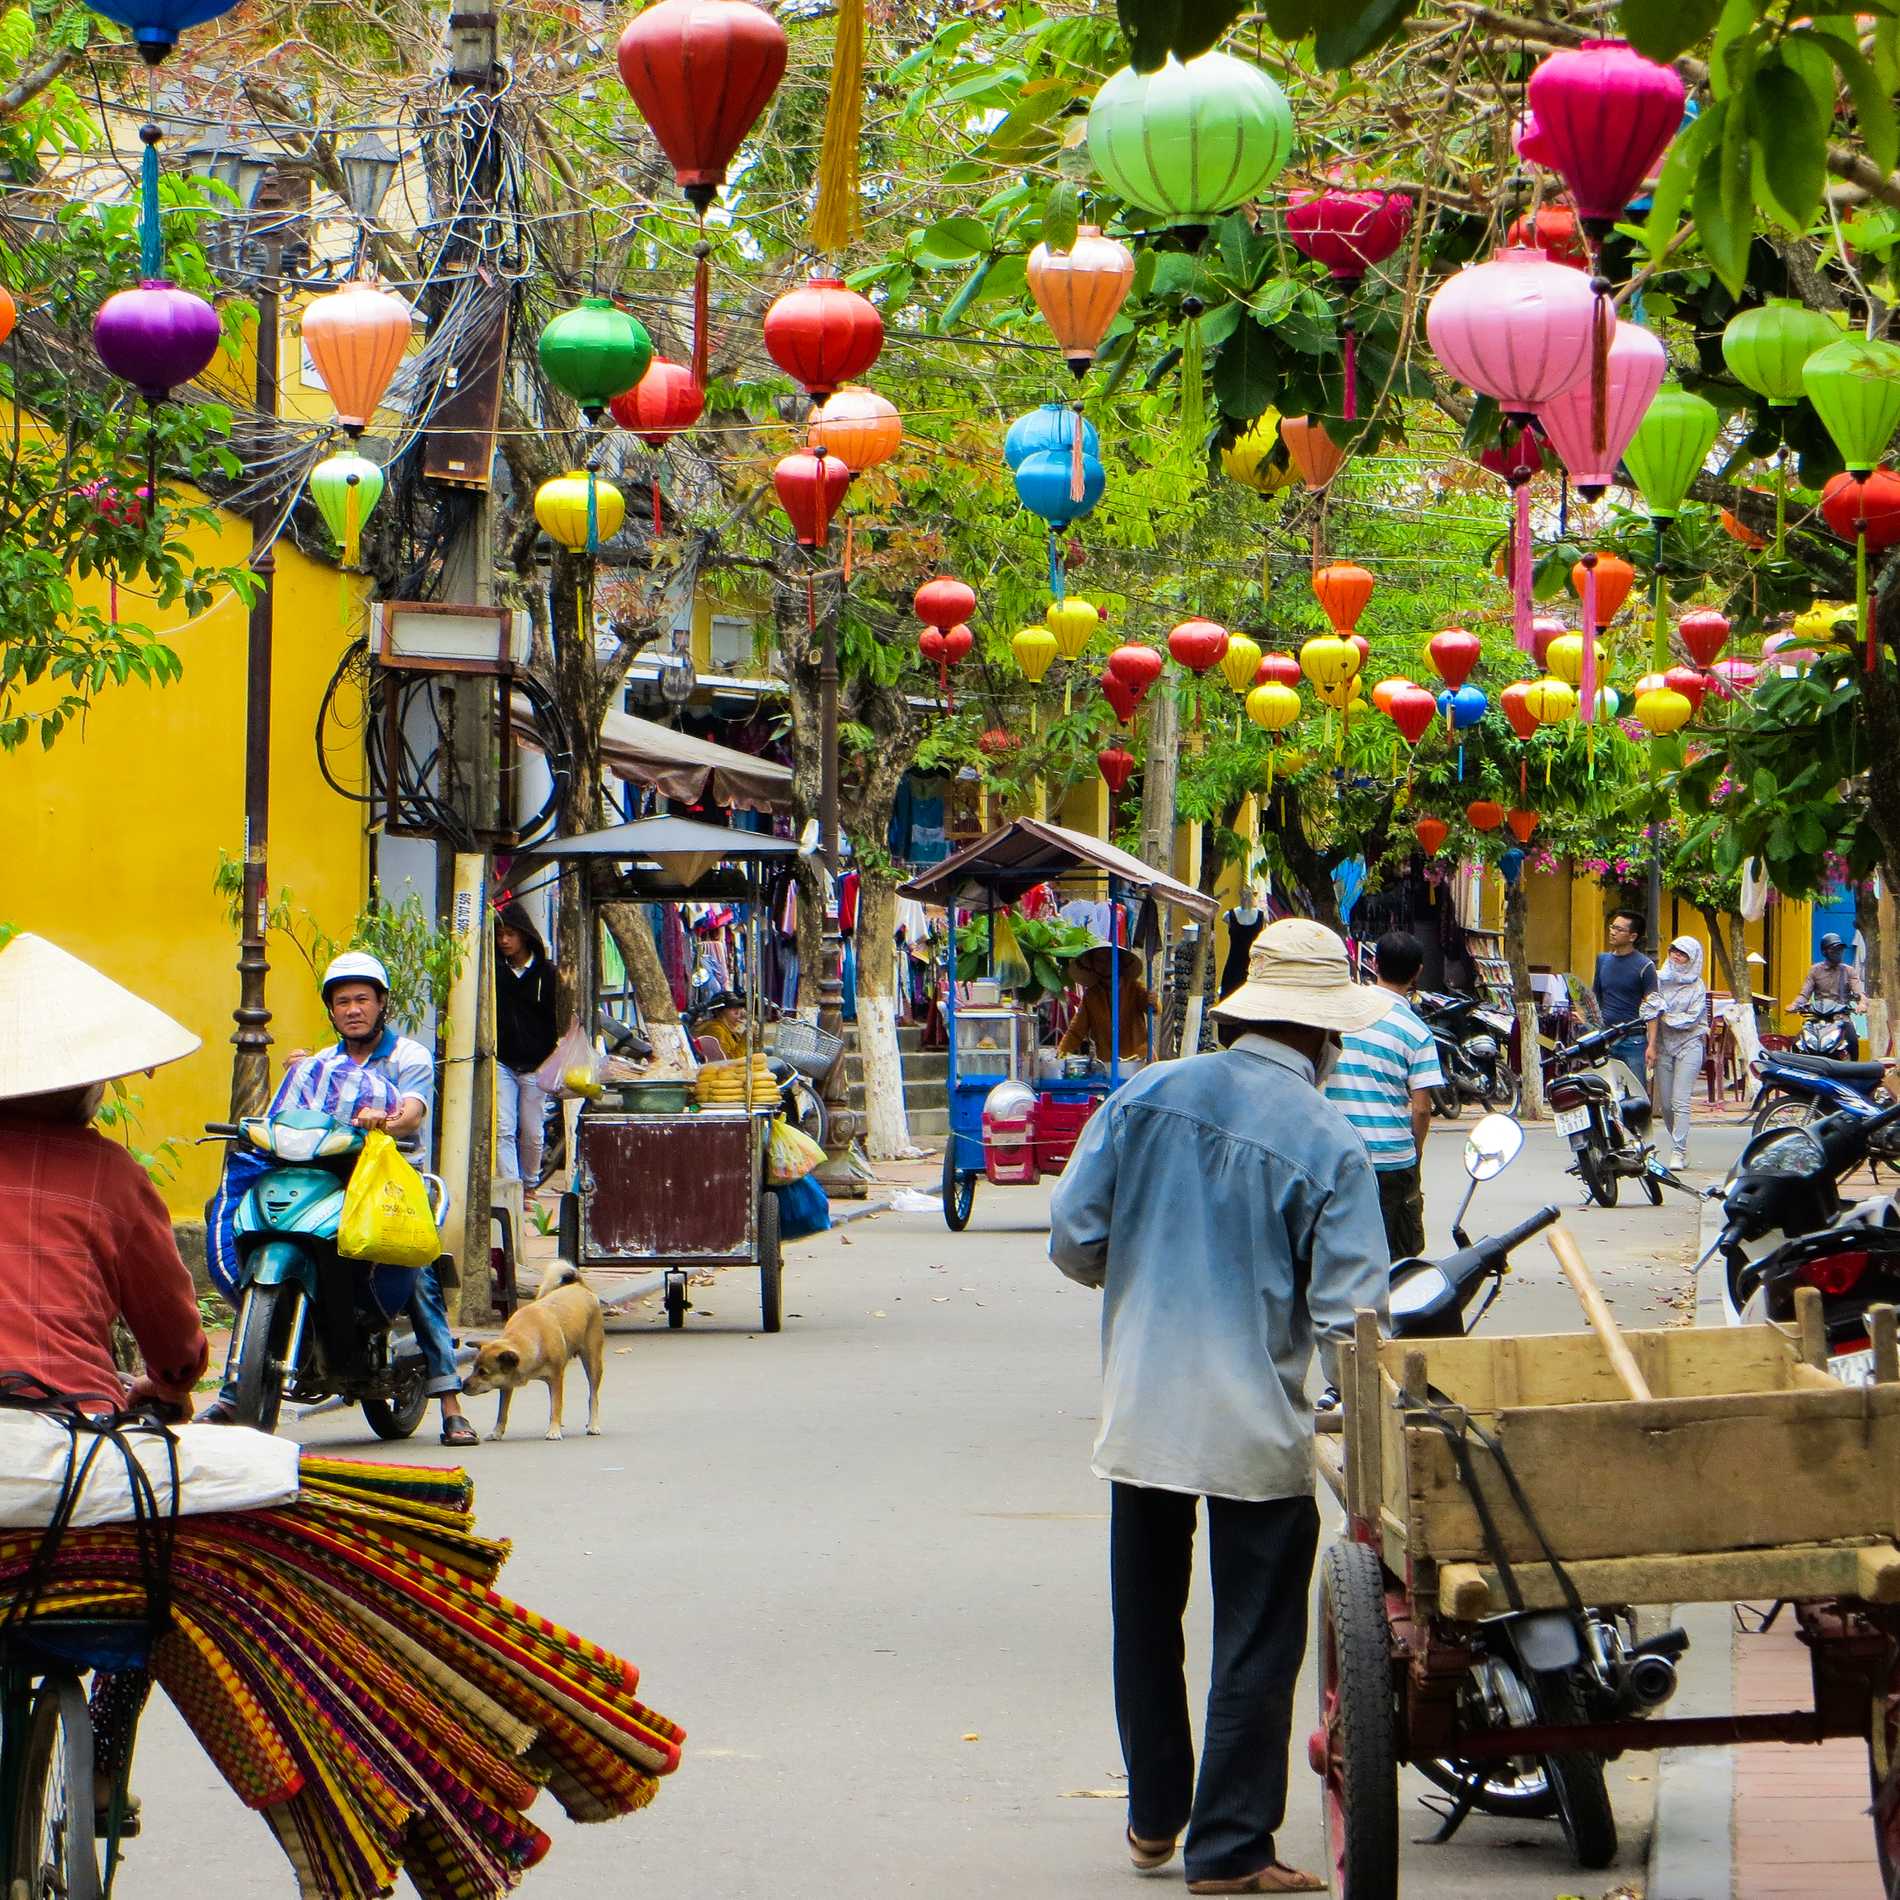 Street Scene – Hoi An, Vietnam: Hoi An is a popular stop for anyone travelling through Vietnam – small but bustling at all hours of the day. It’s full of colour, with bright yellow buildings and vibrant lanterns making it a picture-perfect destination.